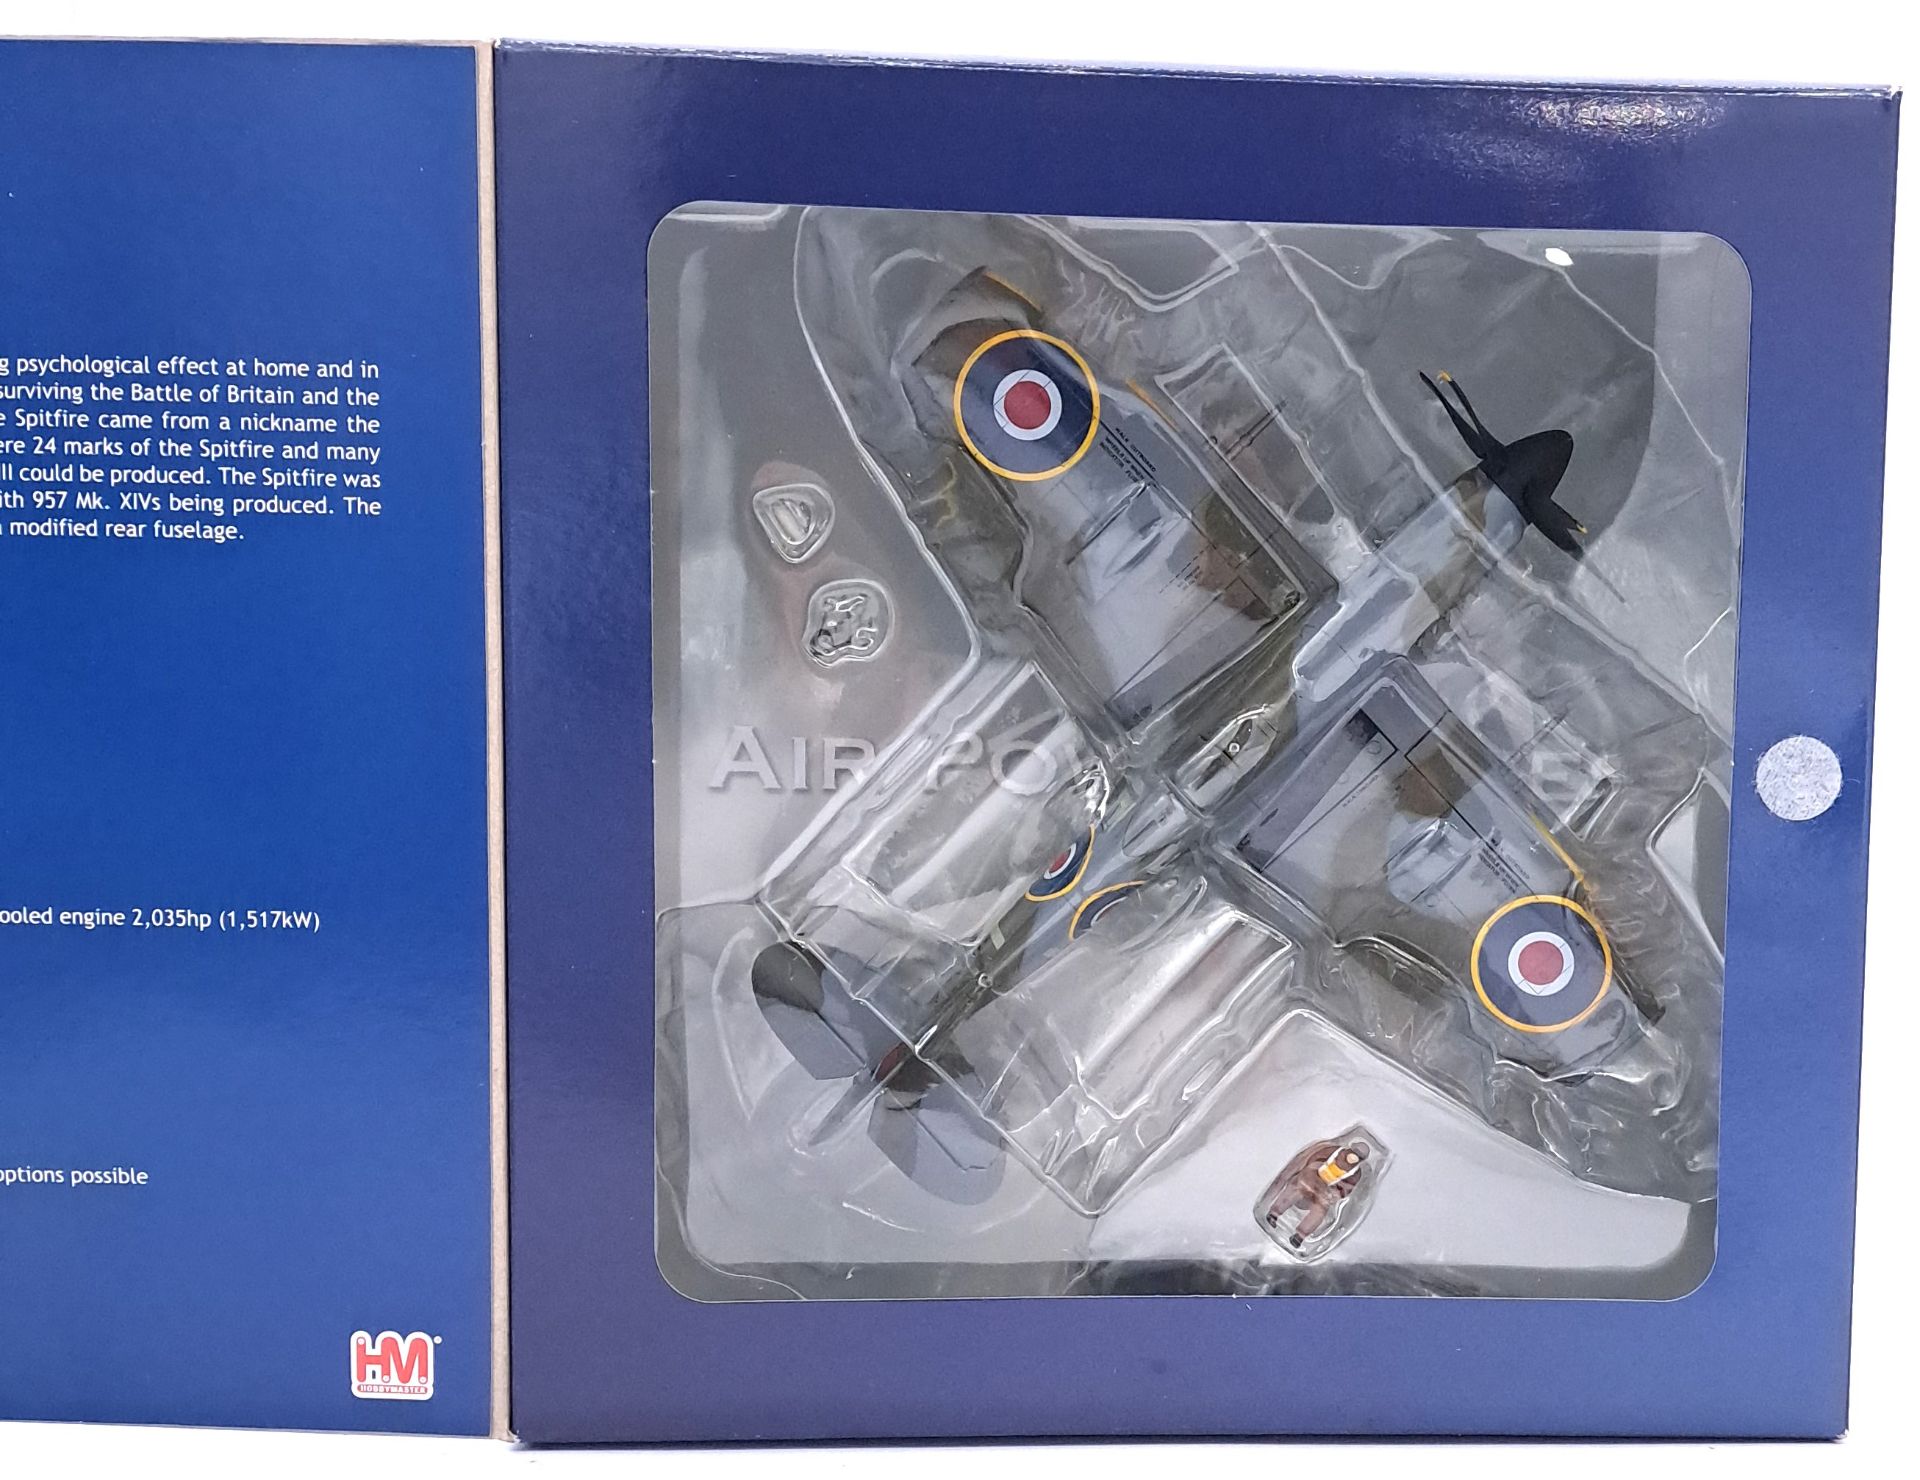 HM Hobby Master, (Air Power Series) a boxed group of 1:48 scale military aircraft "Spitfire" models - Image 5 of 5